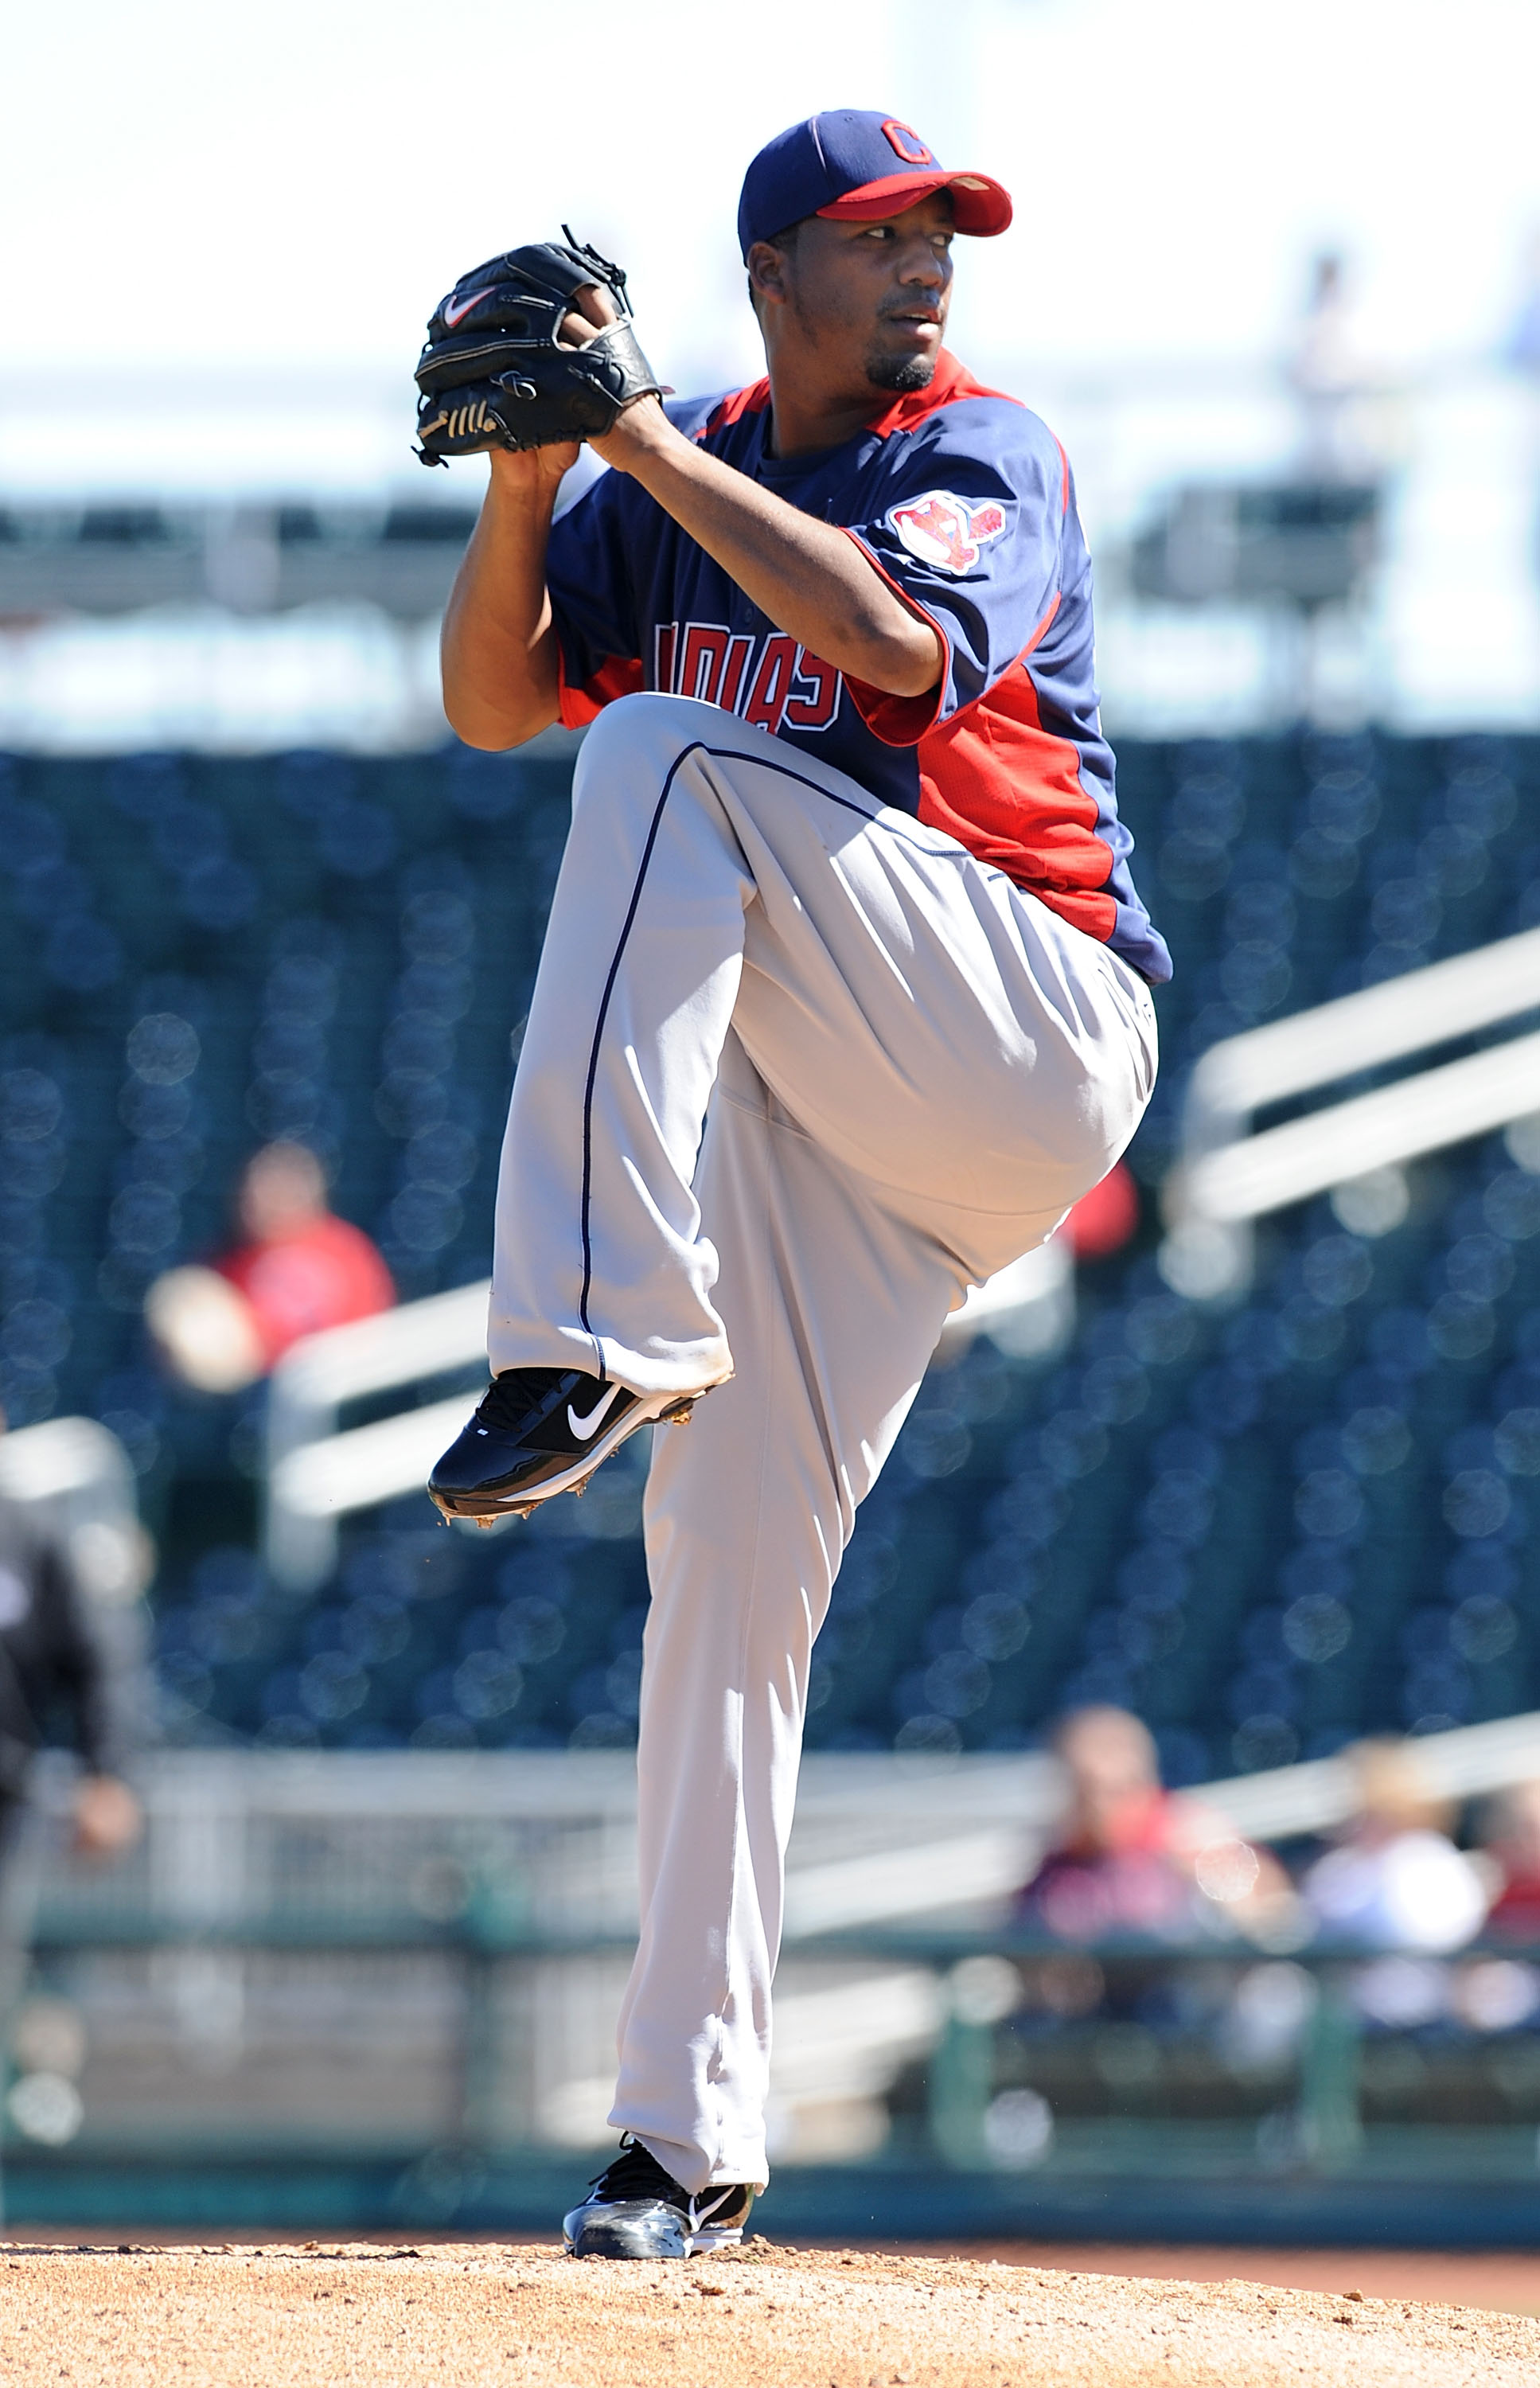 GOODYEAR, AZ - FEBRUARY 28:  Fausto Carmona #55 of the Cleveland Indians delivers a pitch during the first inning against the Cincinnati Reds at Goodyear Ballpark on February 28, 2011 in Goodyear, Arizona.  (Photo by Norm Hall/Getty Images)